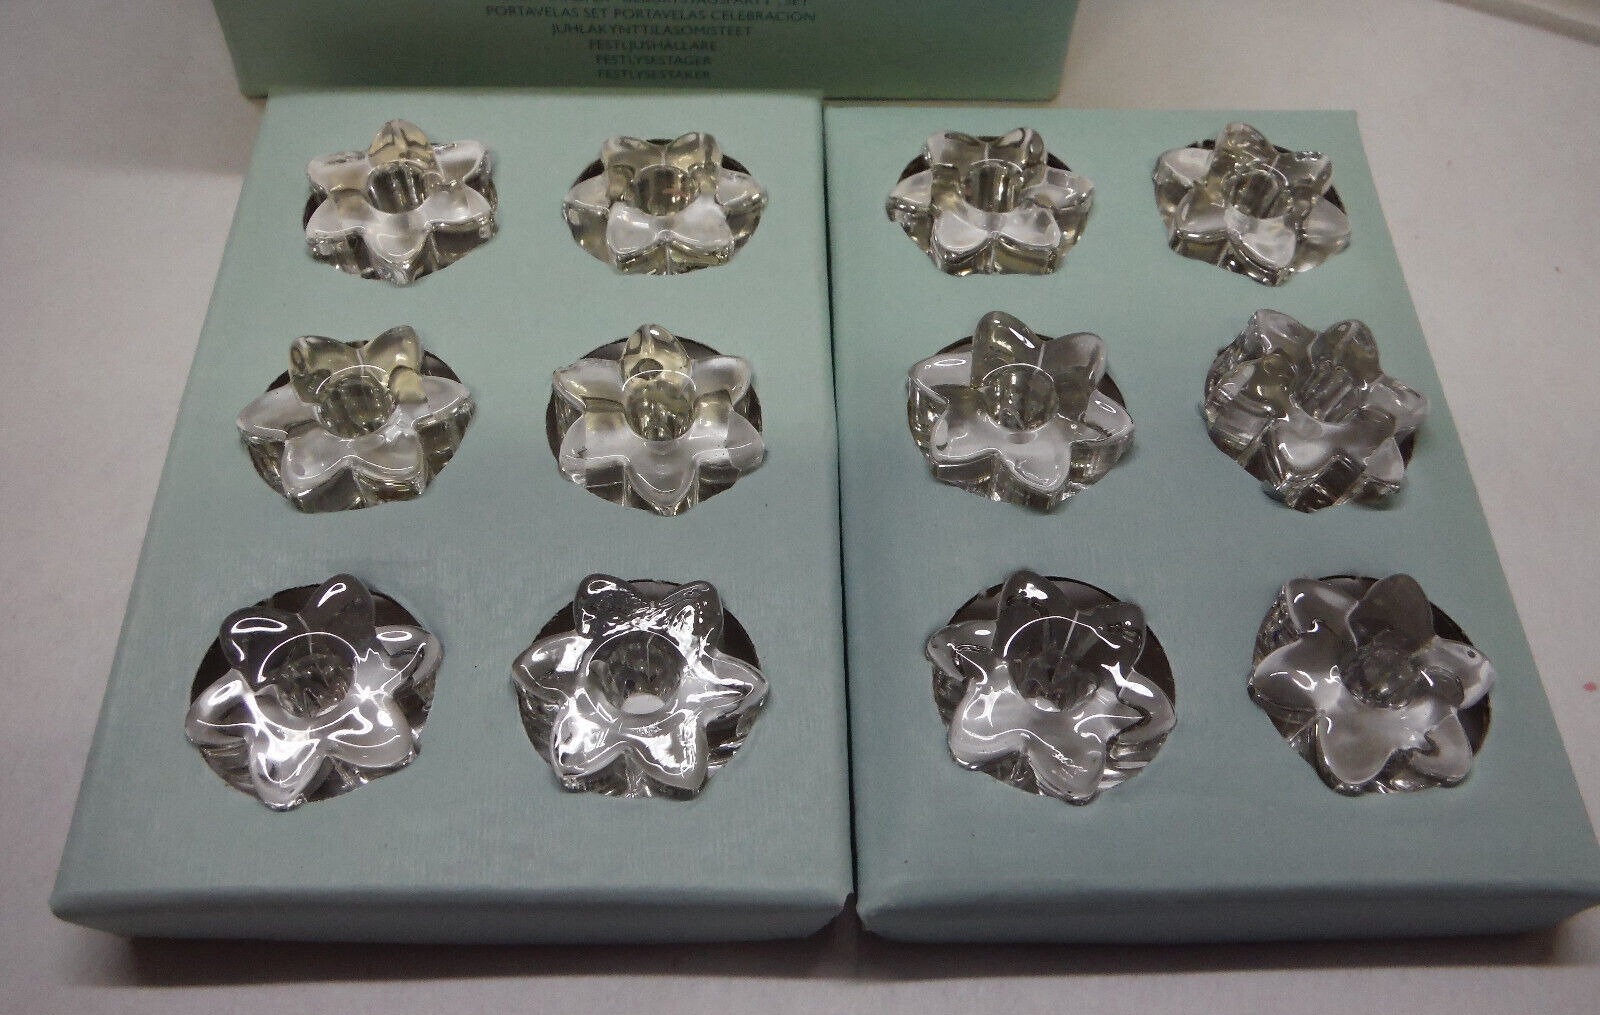 PARTYLITE CELEBRATION SET OF 12 GLASS FLOWER BIRTHDAY CANDLE HOLDERS P9707 X10-1